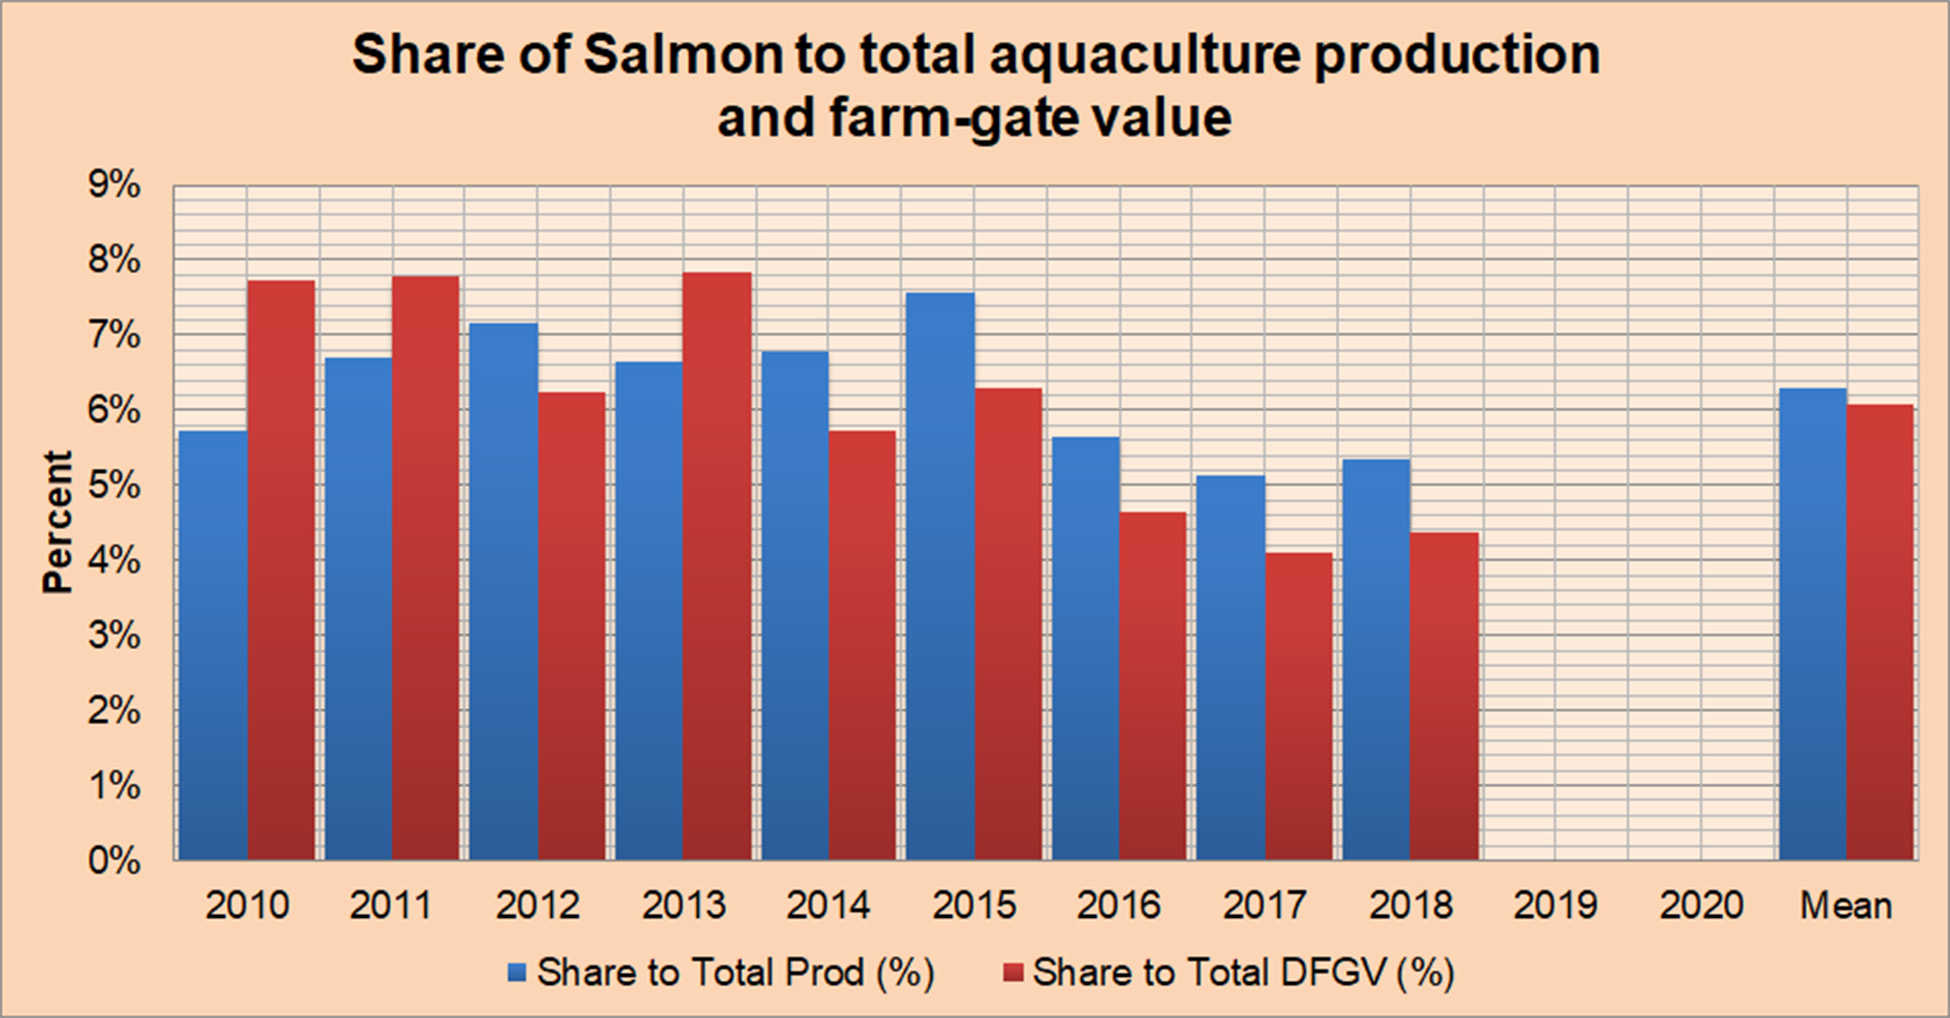 Share of Salmon to Total Aquaculture Production 